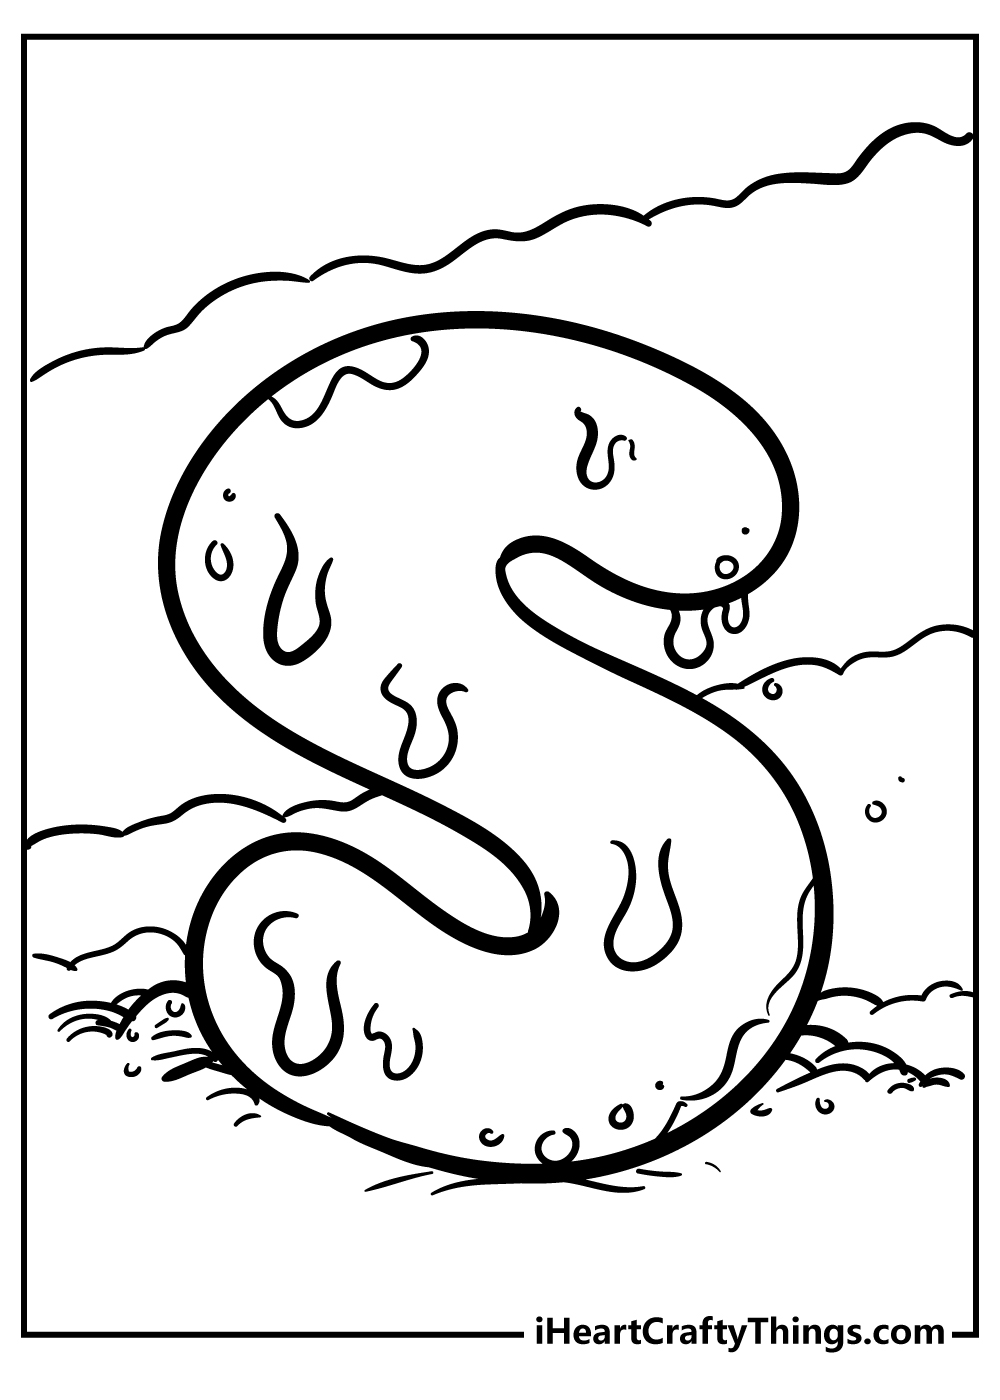 Letter S Coloring Pages for kids free download